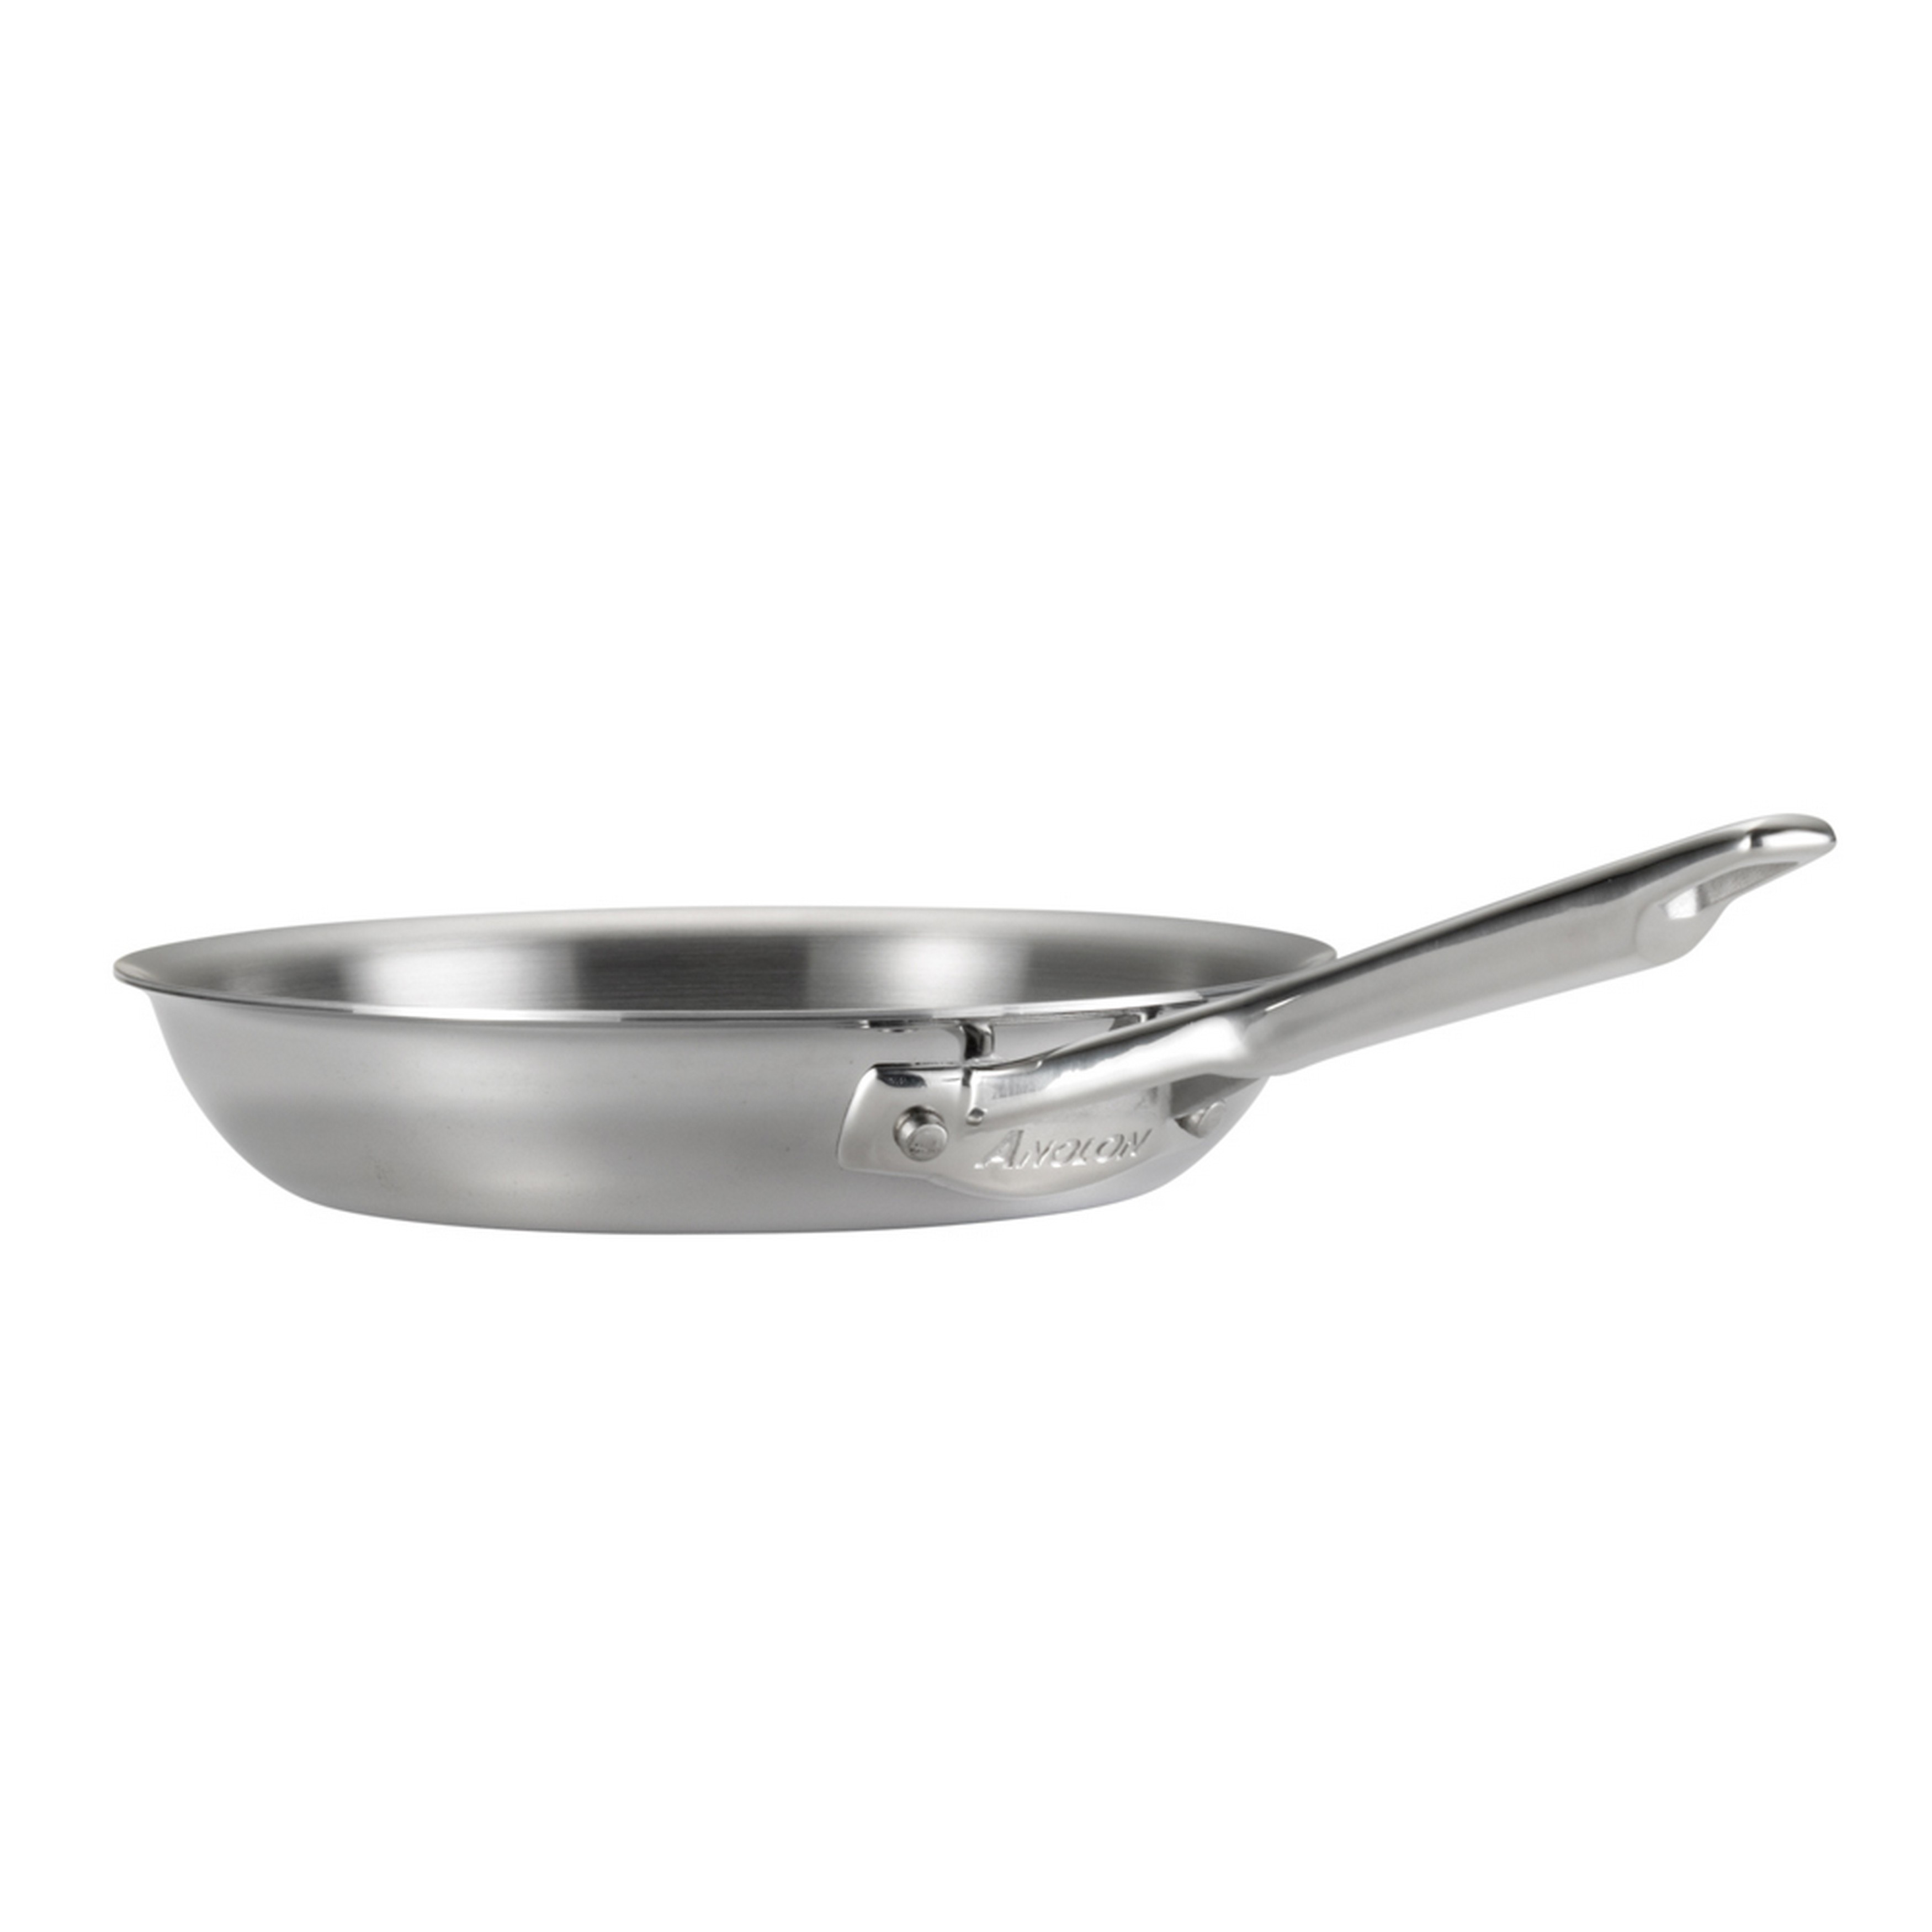 https://ak1.ostkcdn.com/images/products/9206659/Anolon-Tri-Ply-Clad-Stainless-Steel-12-inch-Deep-Round-Grill-Pan-5d35cdb6-df9a-4fe9-82f0-53629acf4c55.jpg